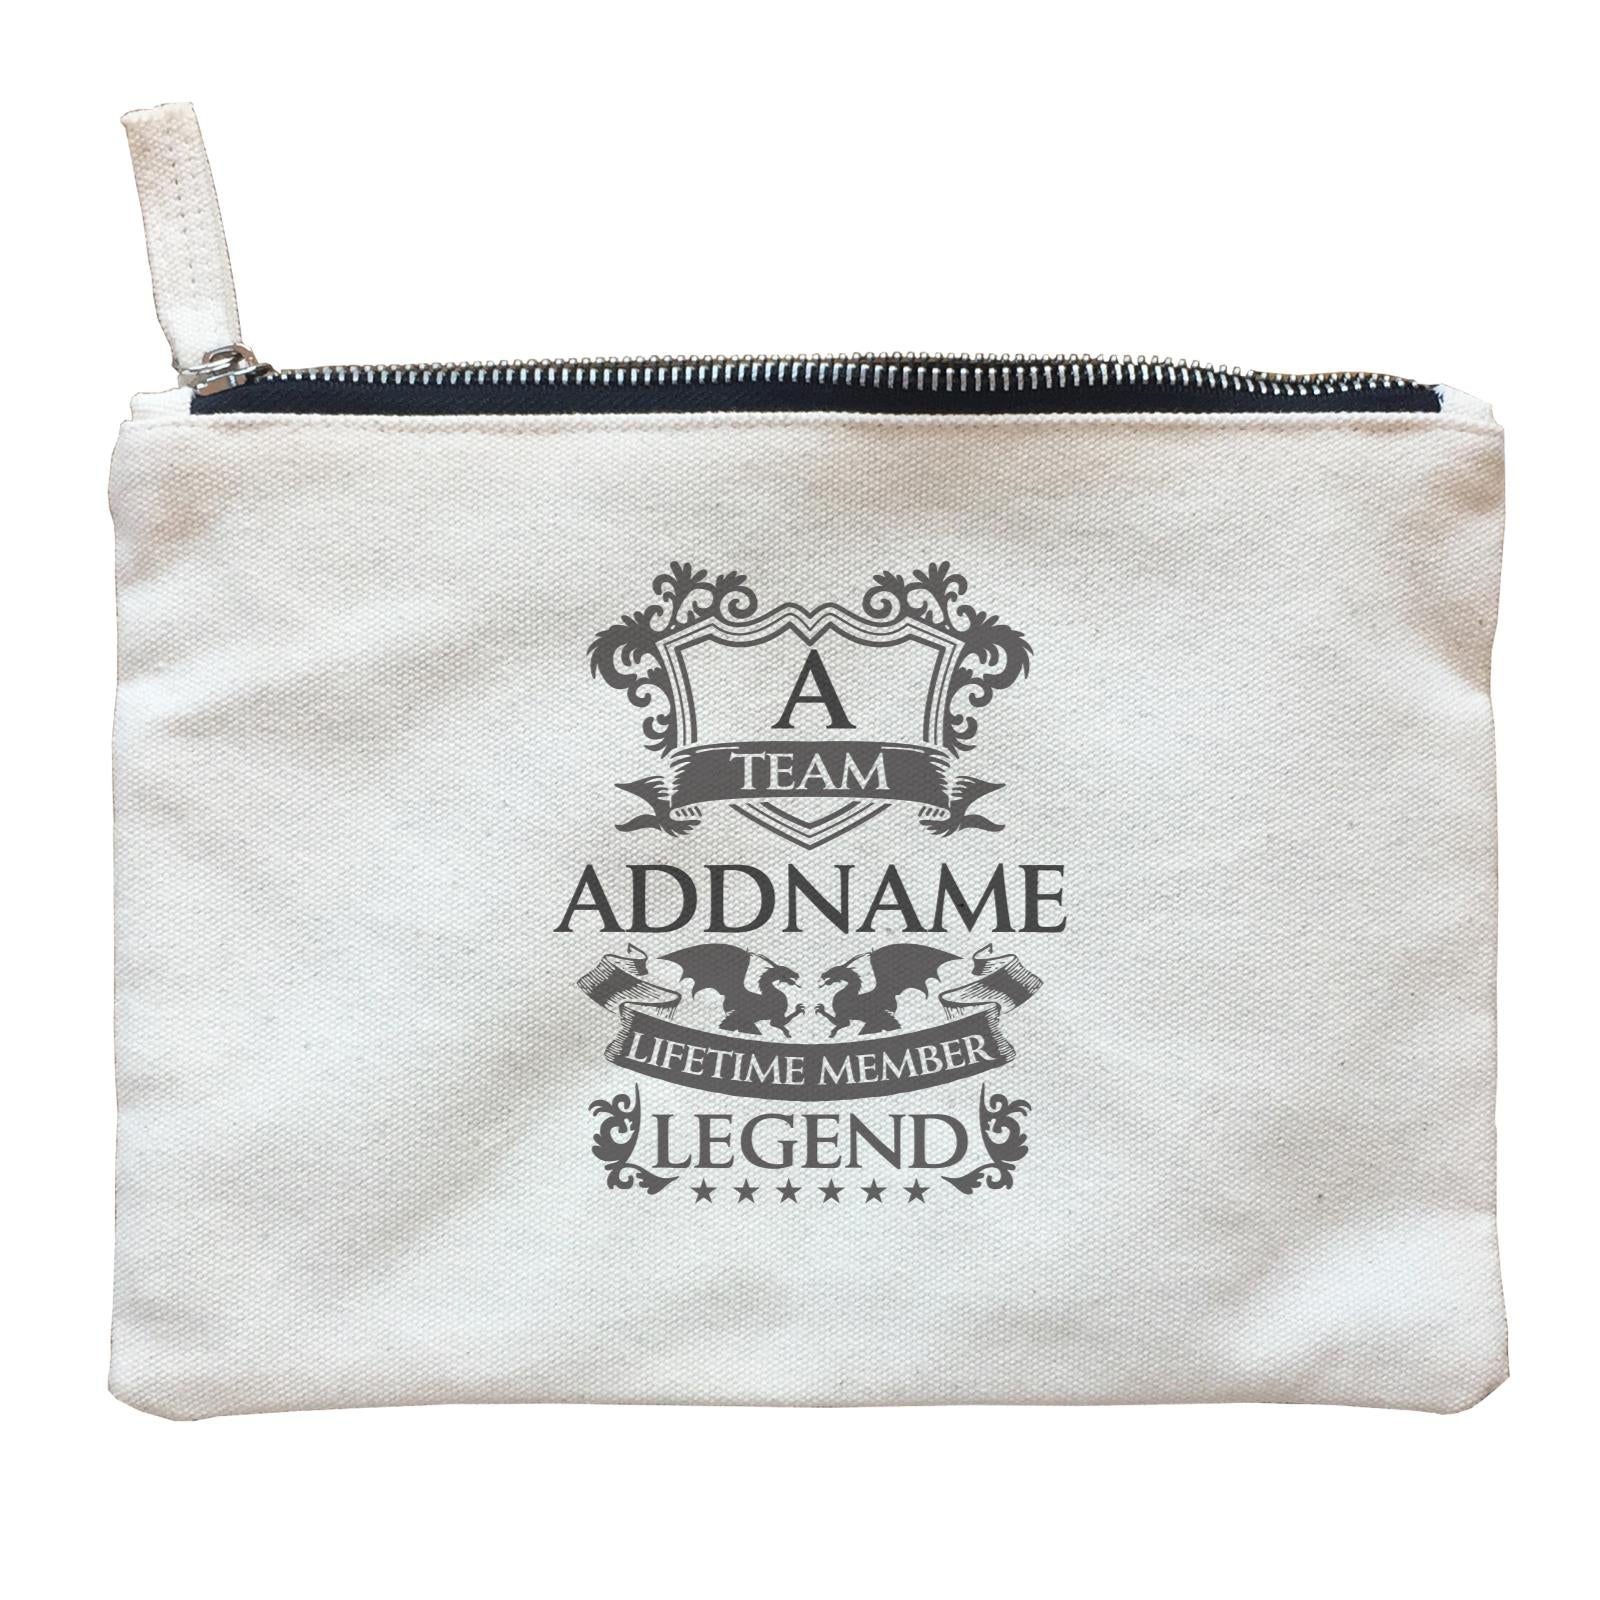 Personalize It Awesome Lifetime Member Legend with Team Addname Zipper Pouch